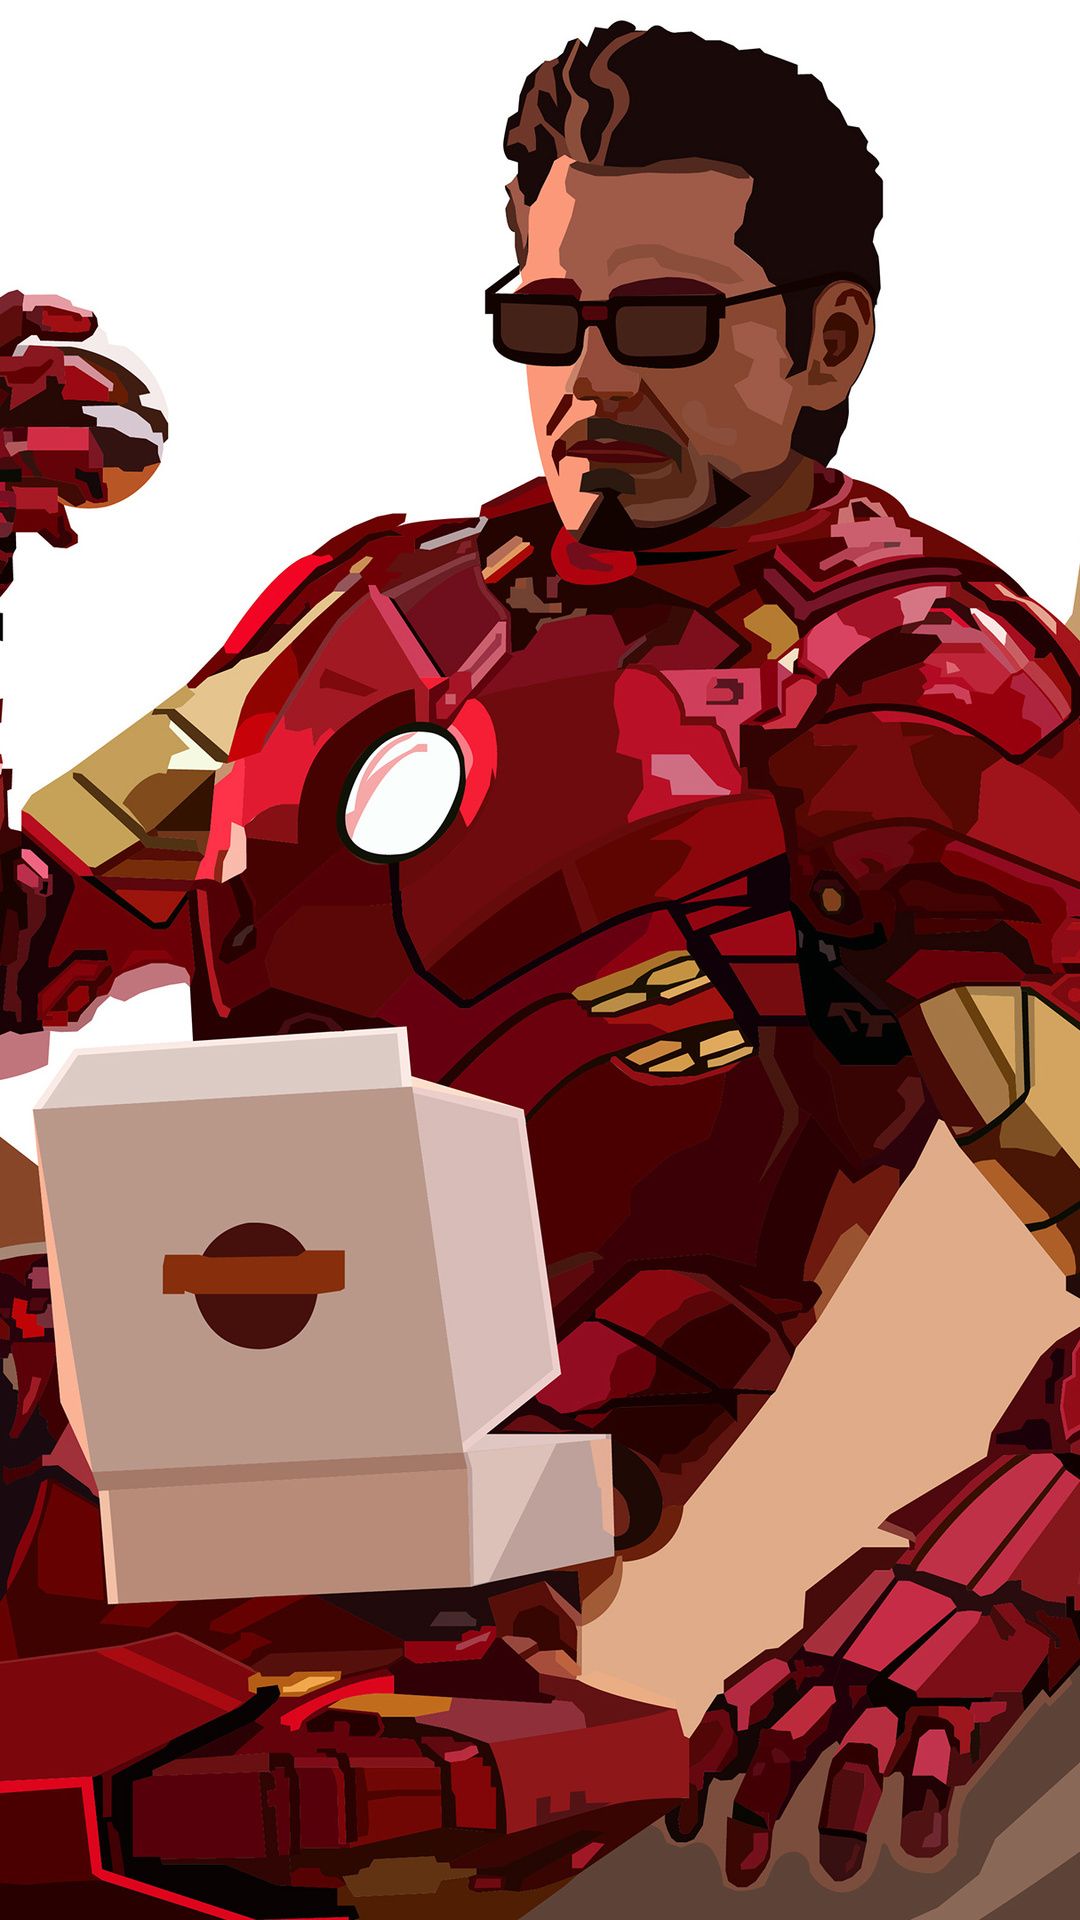  Iron Man Hintergrundbild 1080x1920. Iron Man Eating Donuts iPhone 6s, 6 Plus, Pixel xl , One Plus 3t, 5 HD 4k Wallpaper, Image, Background, Photo and Picture